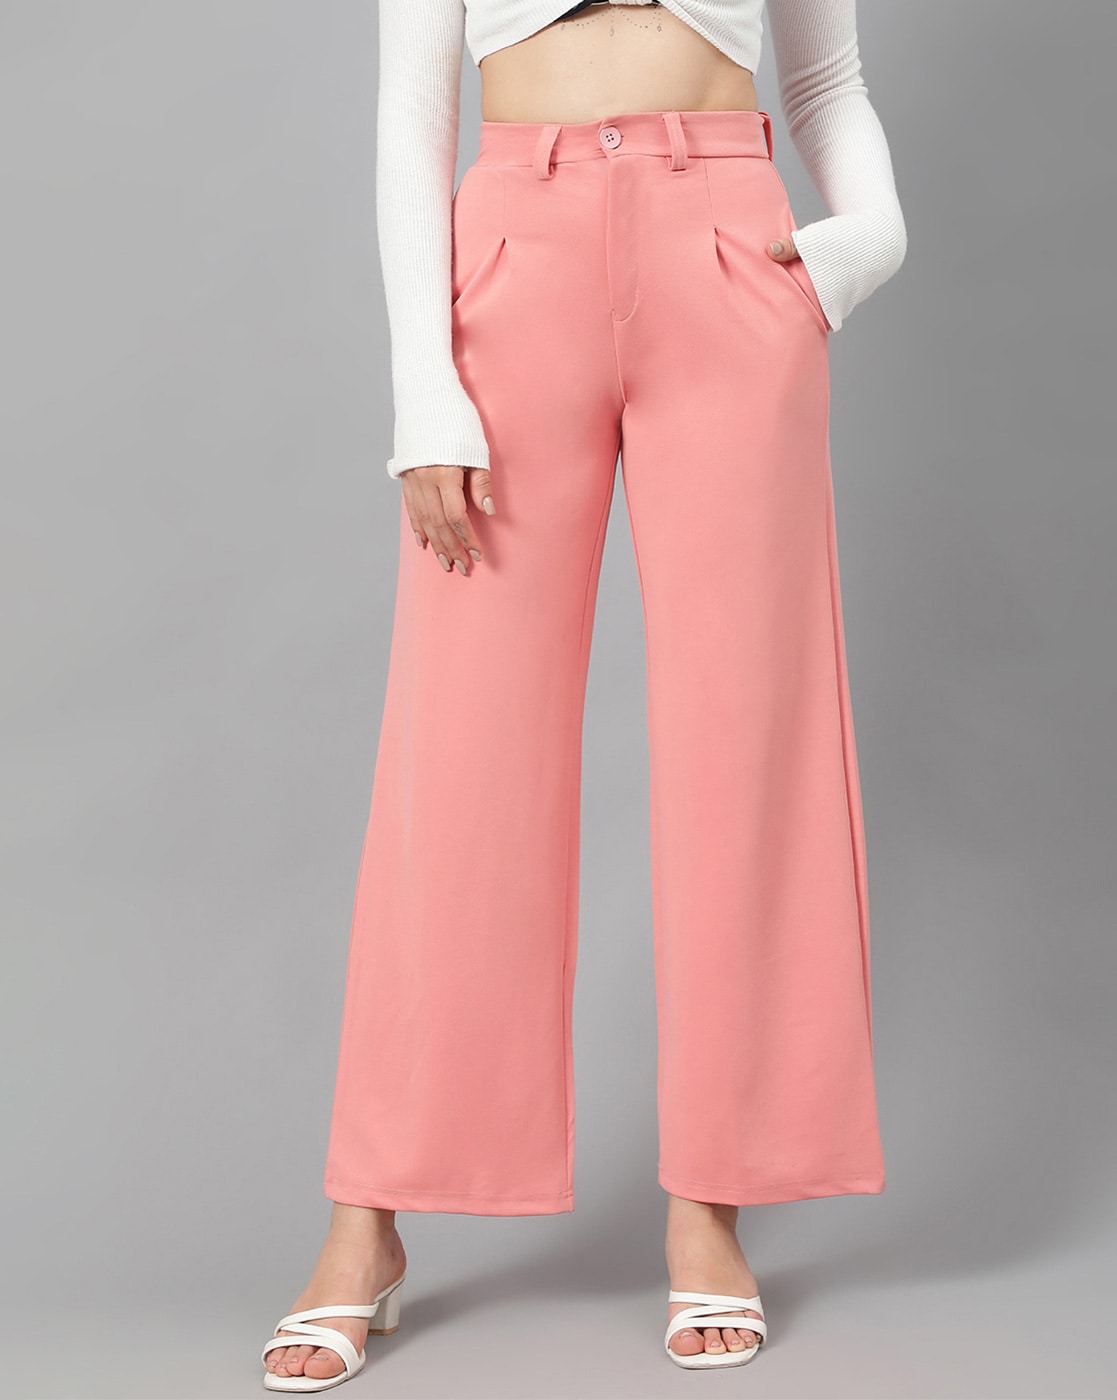 Buy Pocketful Of Cherrie Pink Parachute Tailored Trousers Online  Aza  Fashions